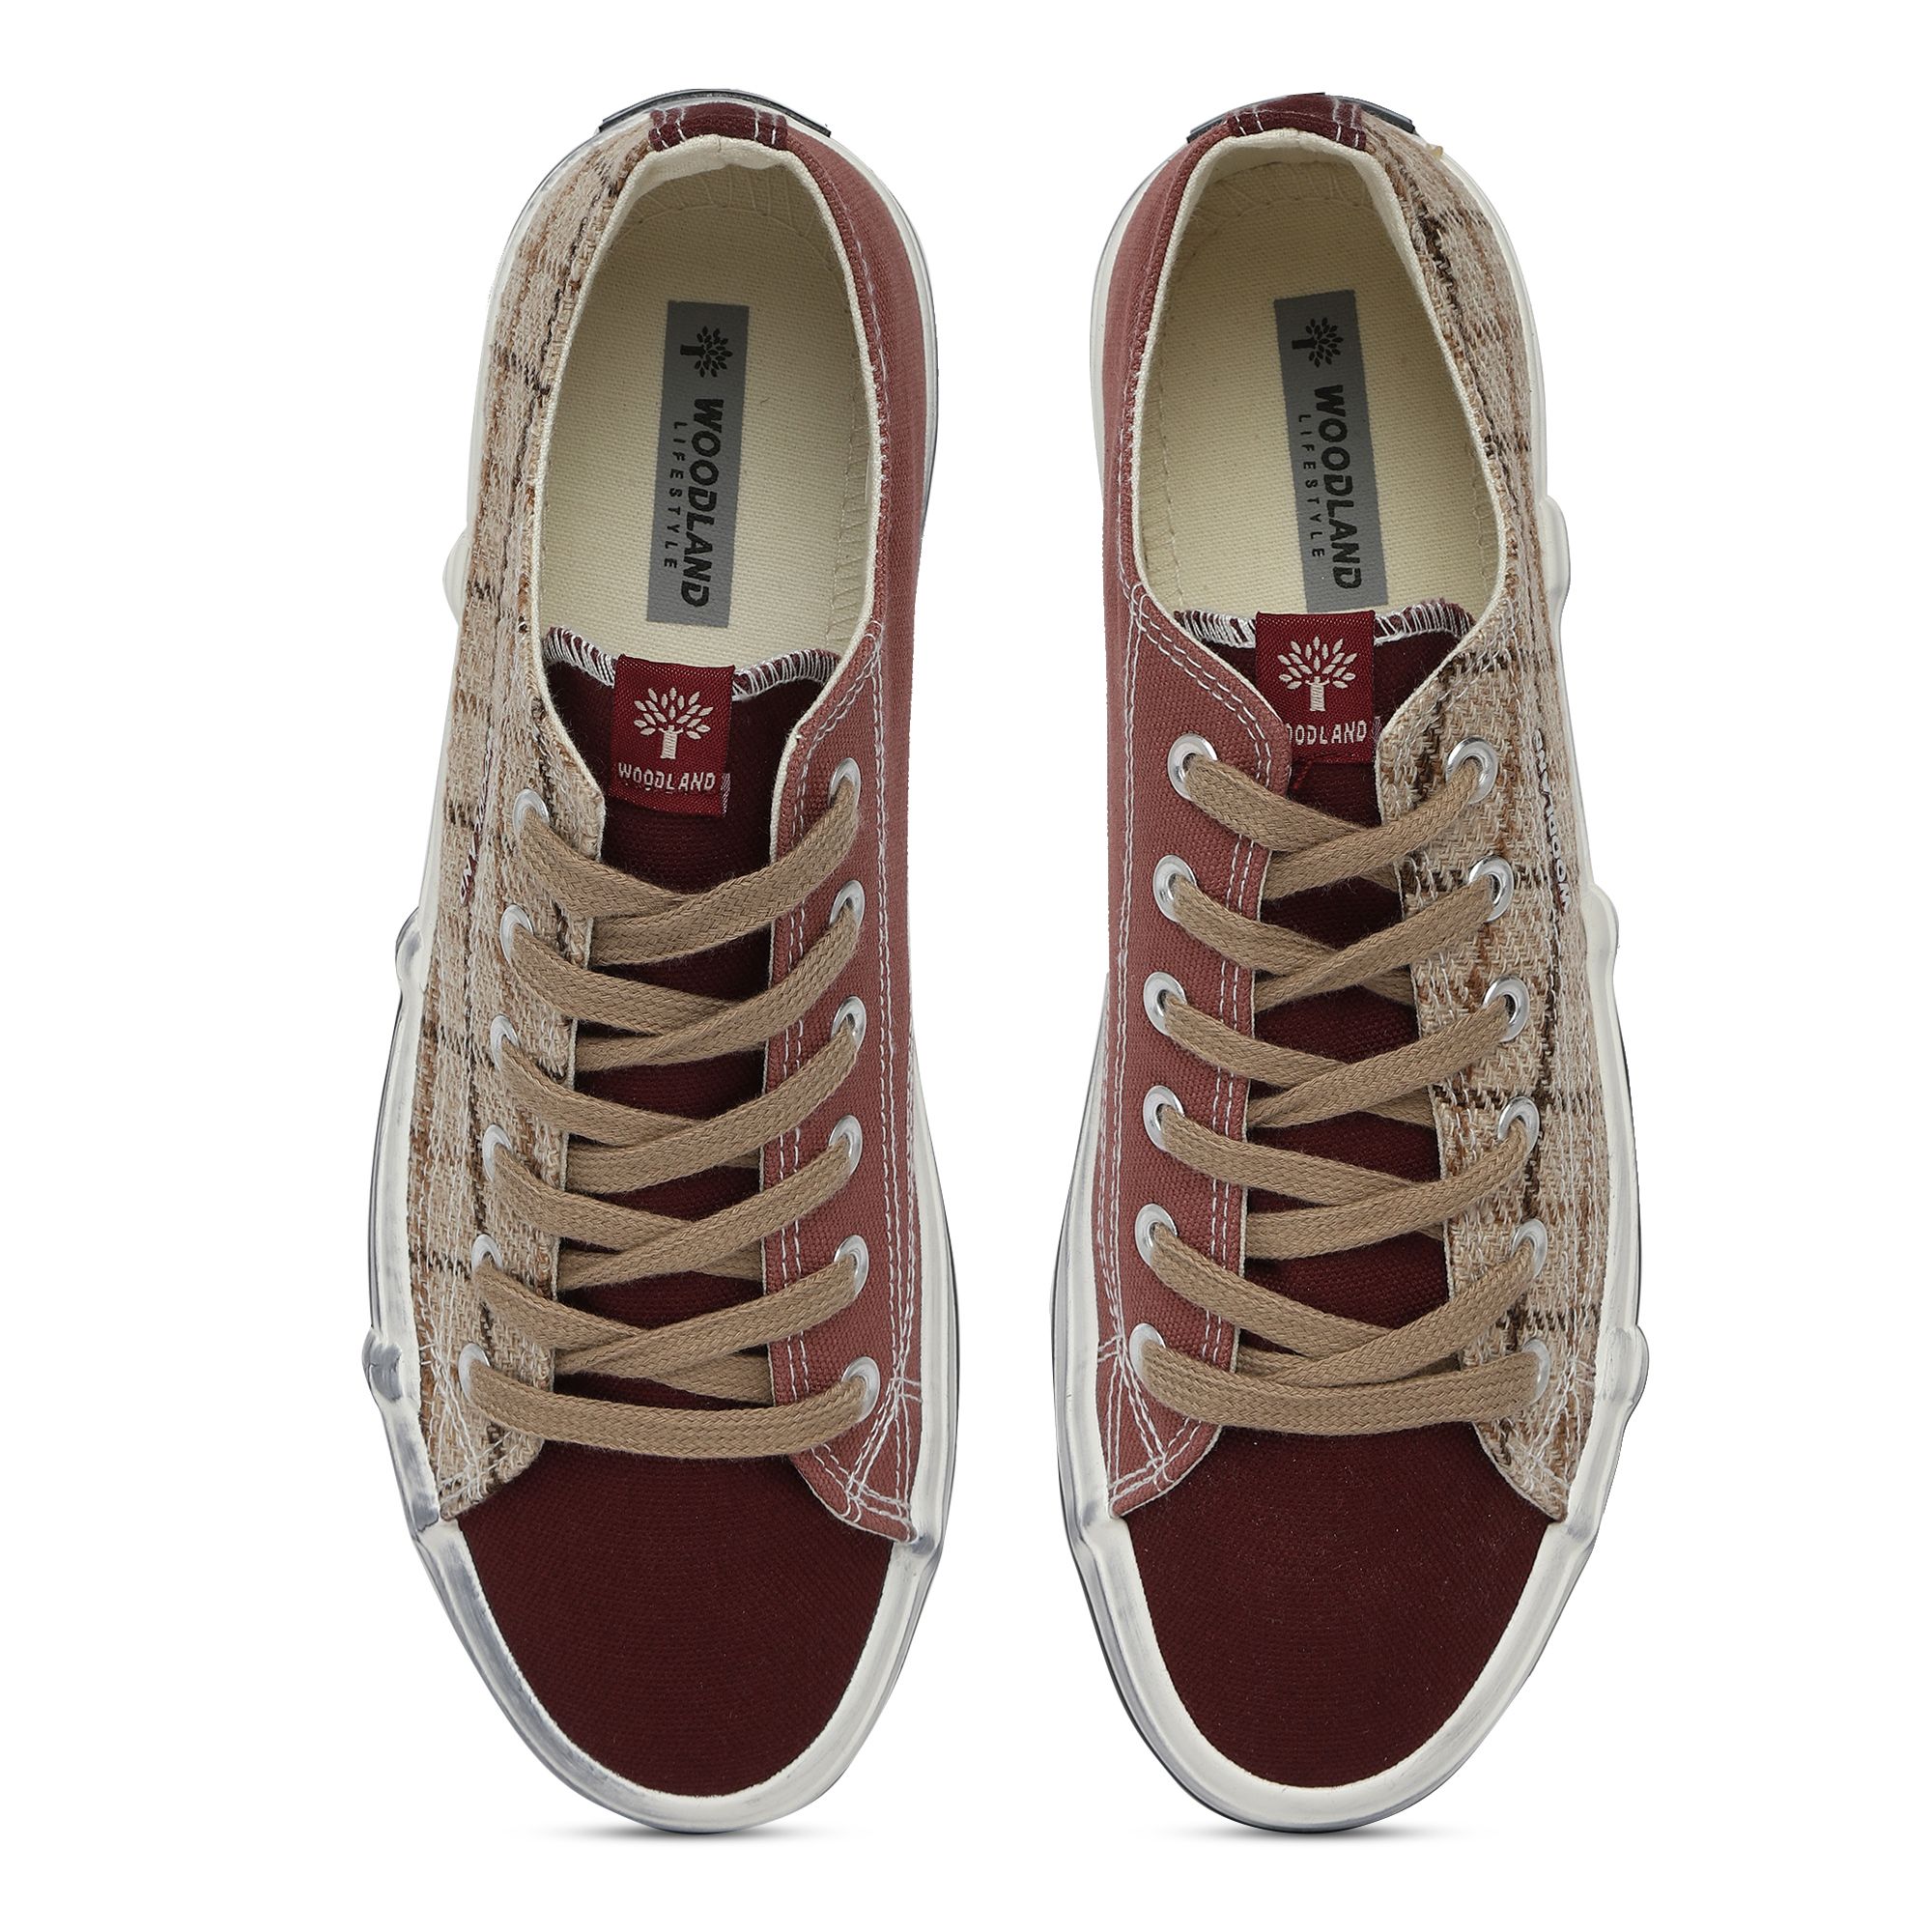 Brown/maroon Canvas shoes for women